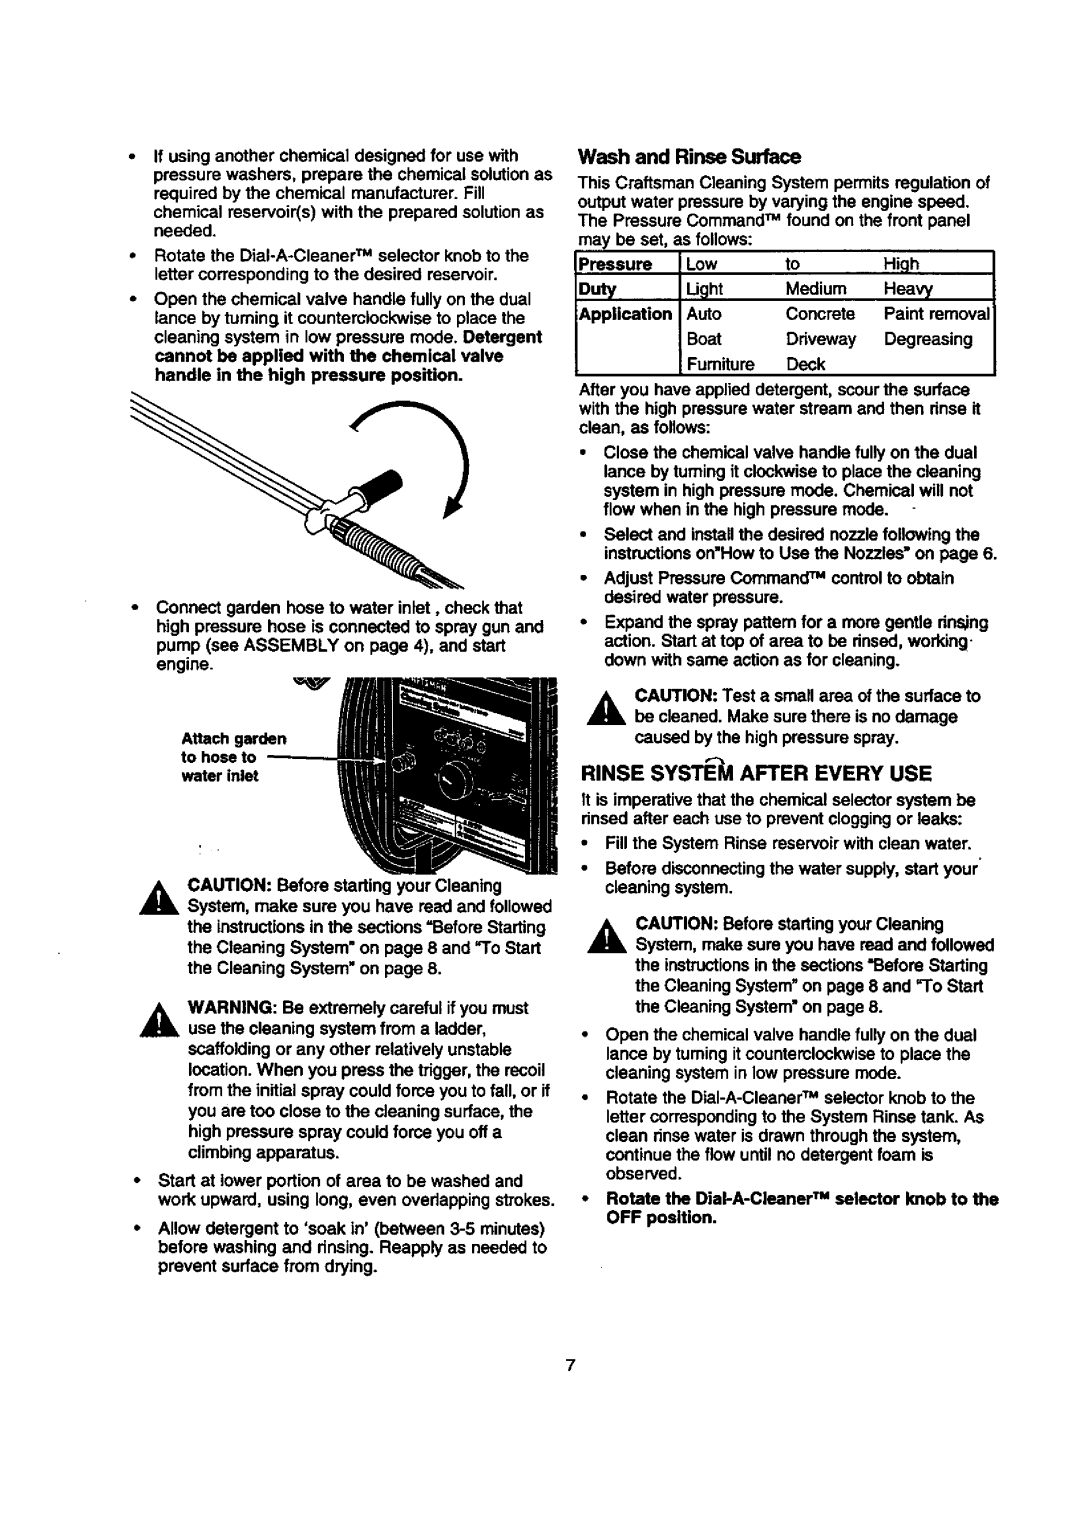 Sears 580.768050 manual RotatetheDial-A-CleanerTM selector knobto the, Wash and Rinse Surface 